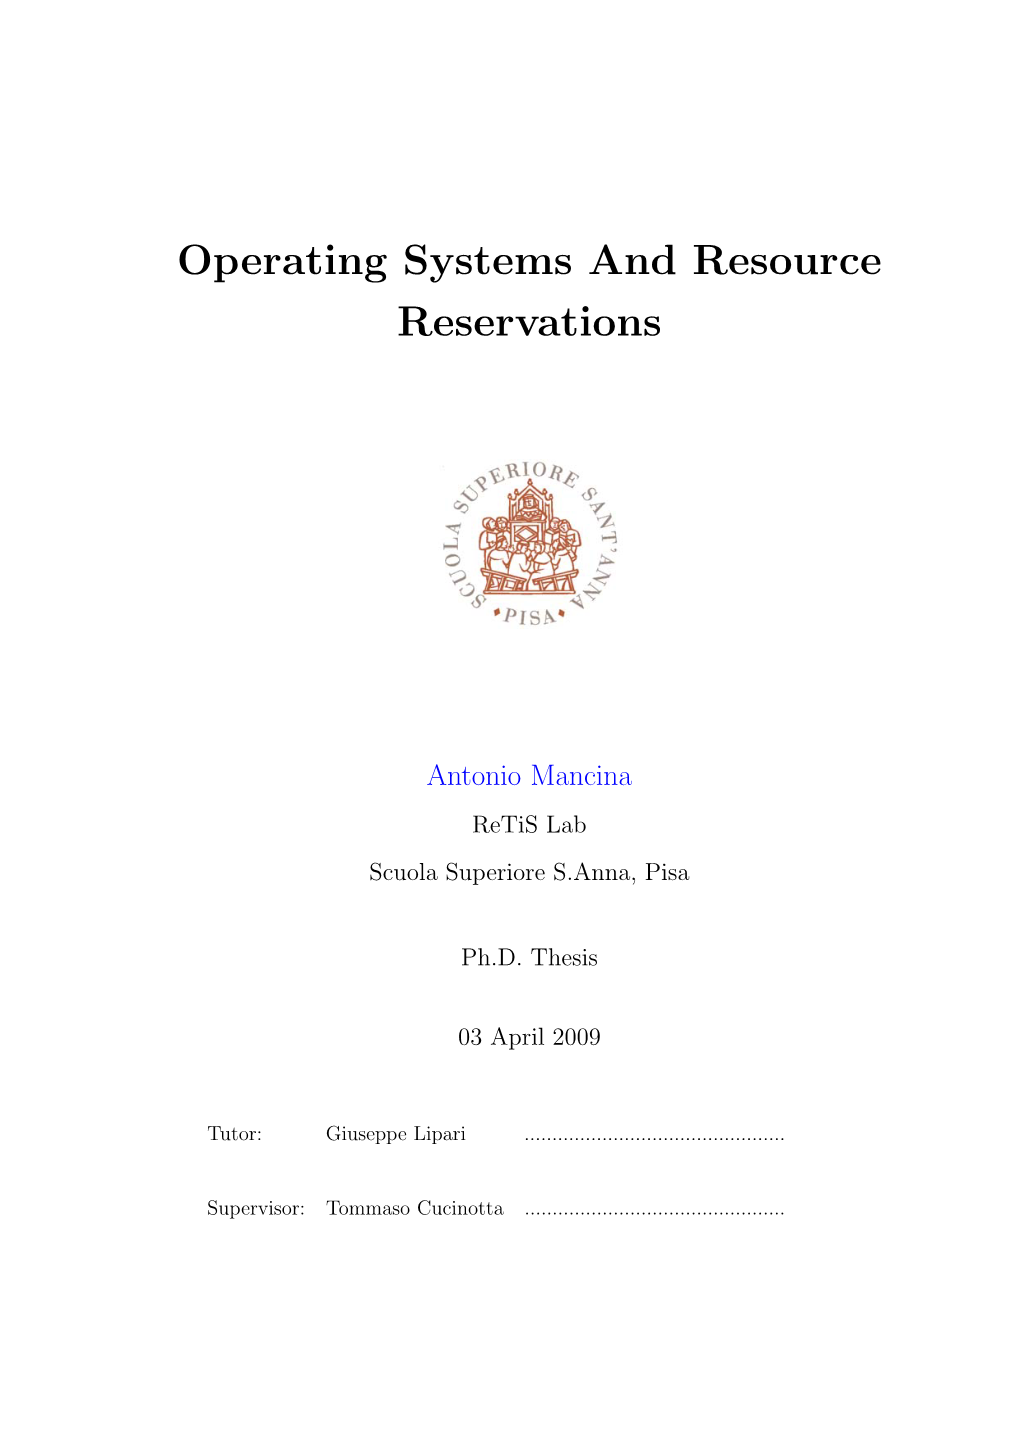 Operating Systems and Resource Reservations